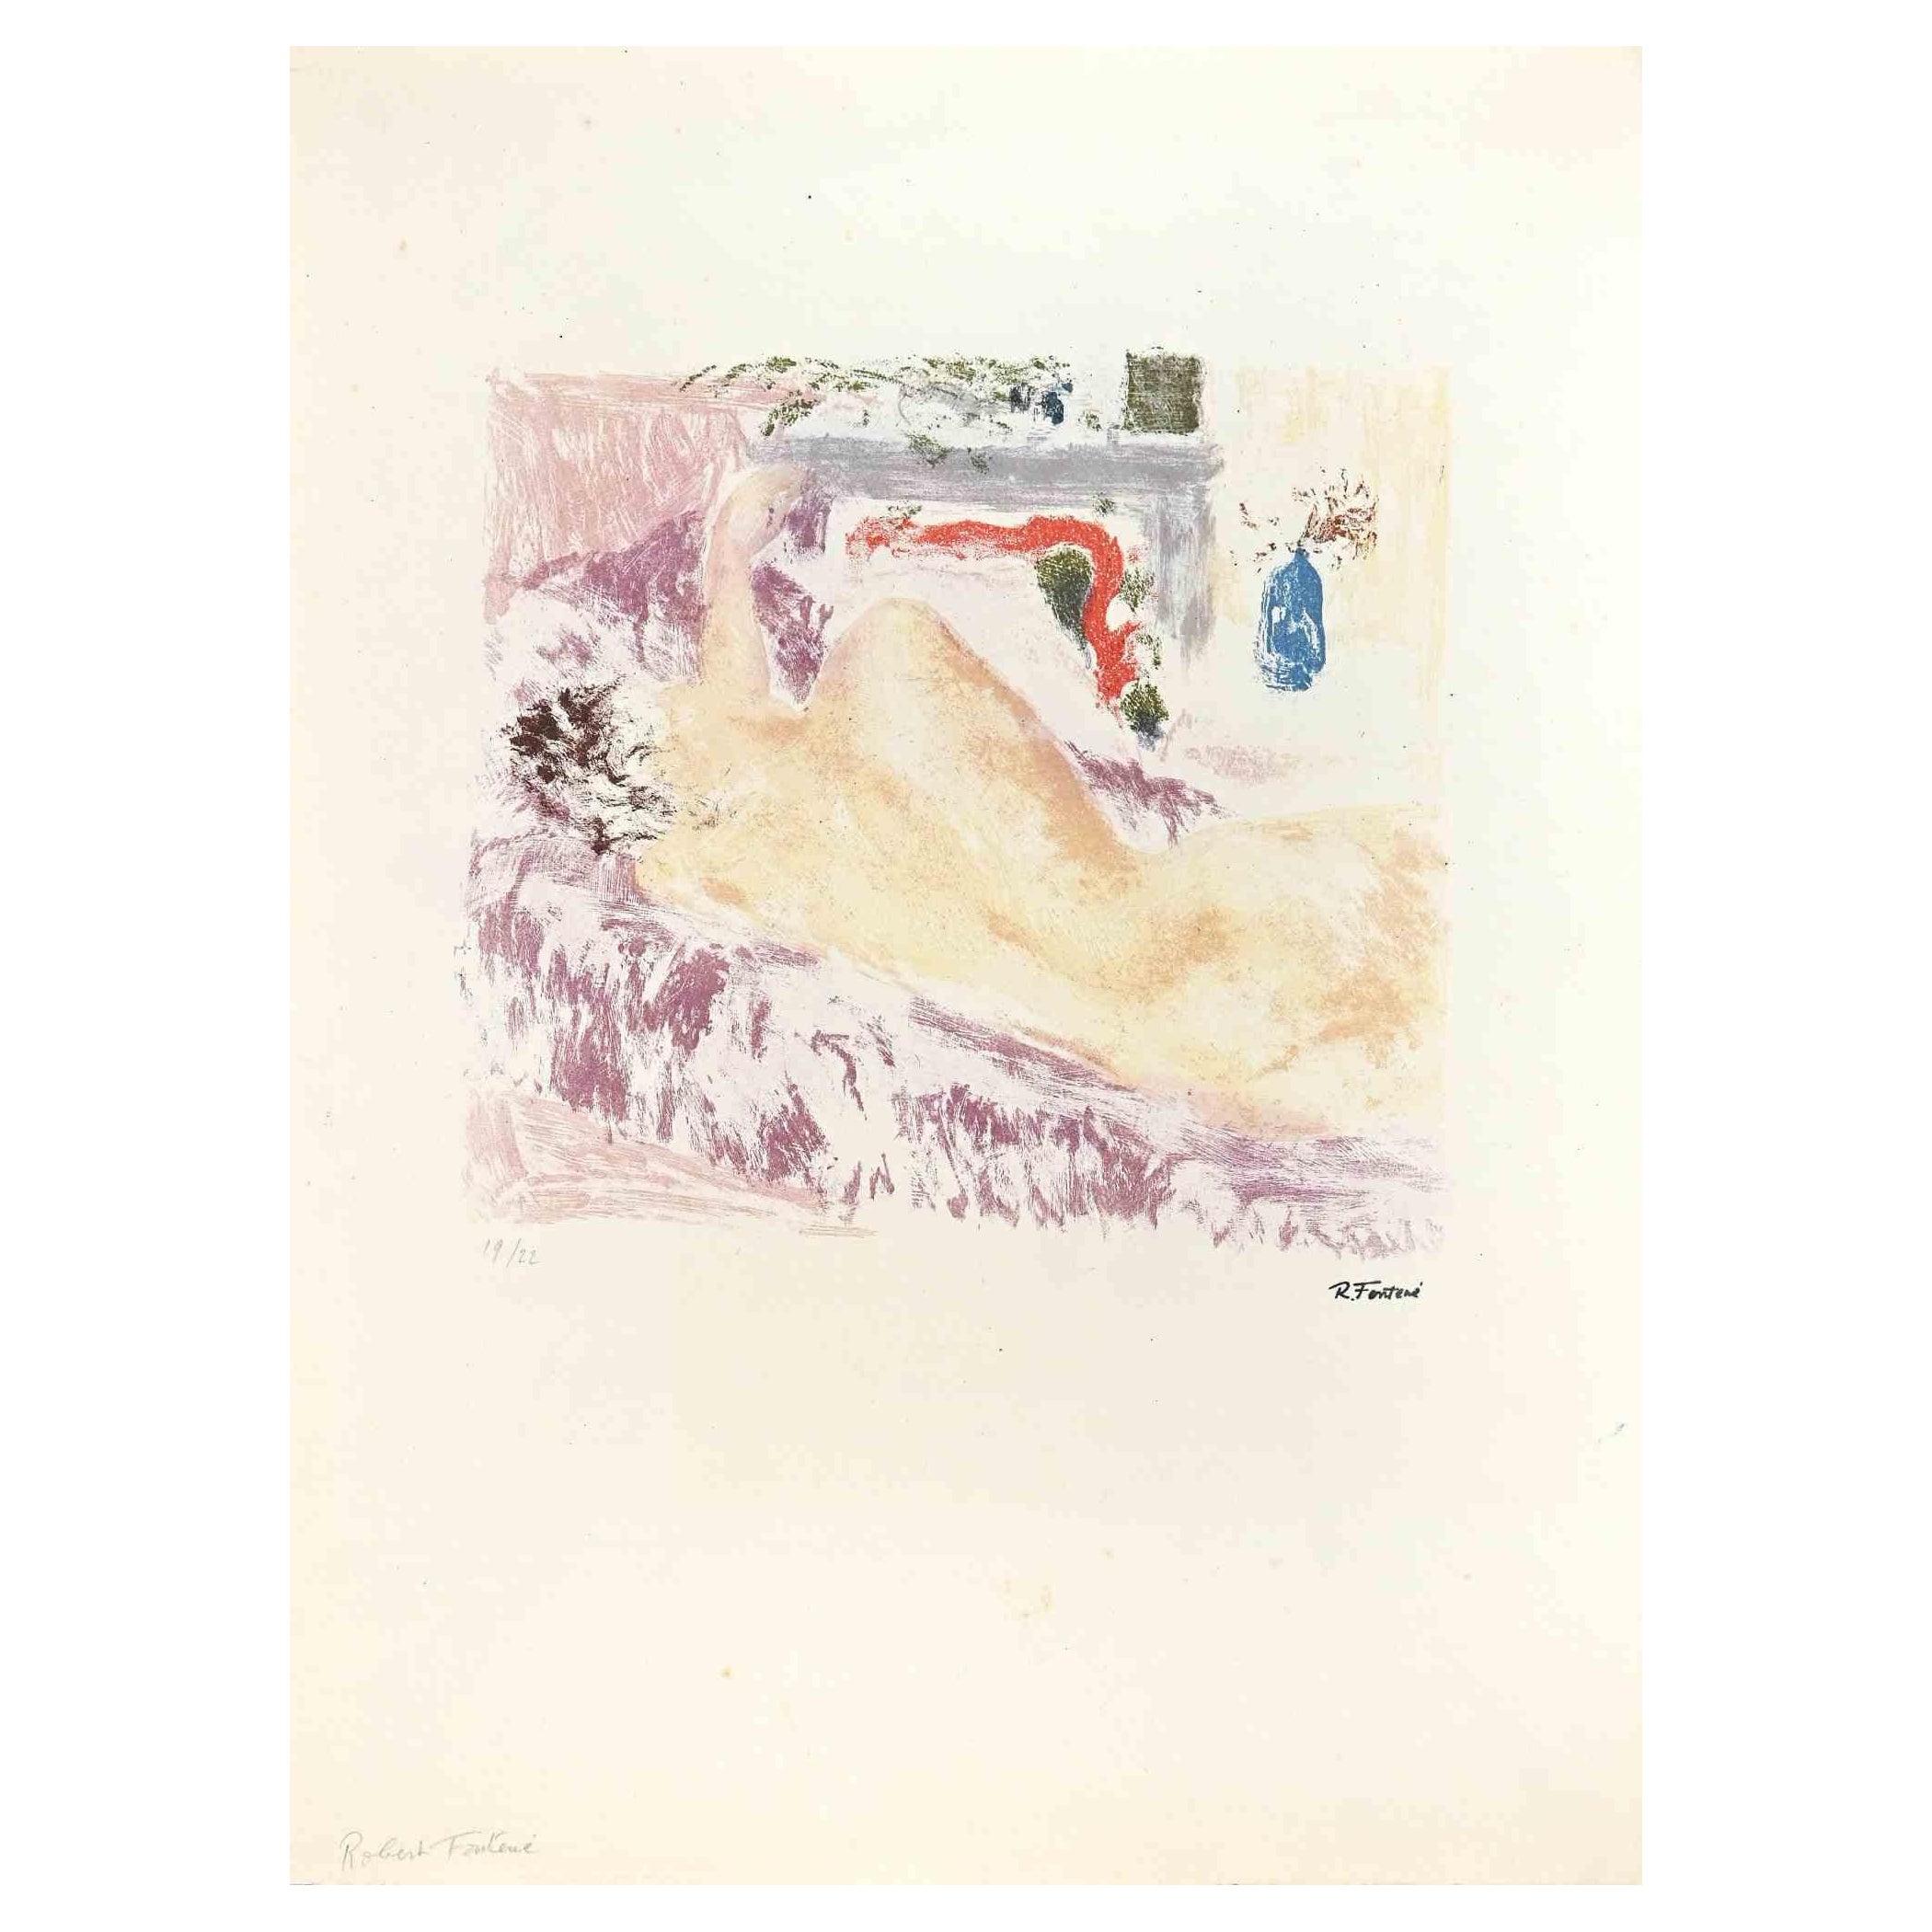 Sleeping Nude is a lithograph on paper realized by Robert Fontené in the mid-20th Century.

Hand-signed on the lower right.

Numbered on the lower left, the edition of 19/22 prints.

The artwork is in good condition with minor foxing.

The artwork